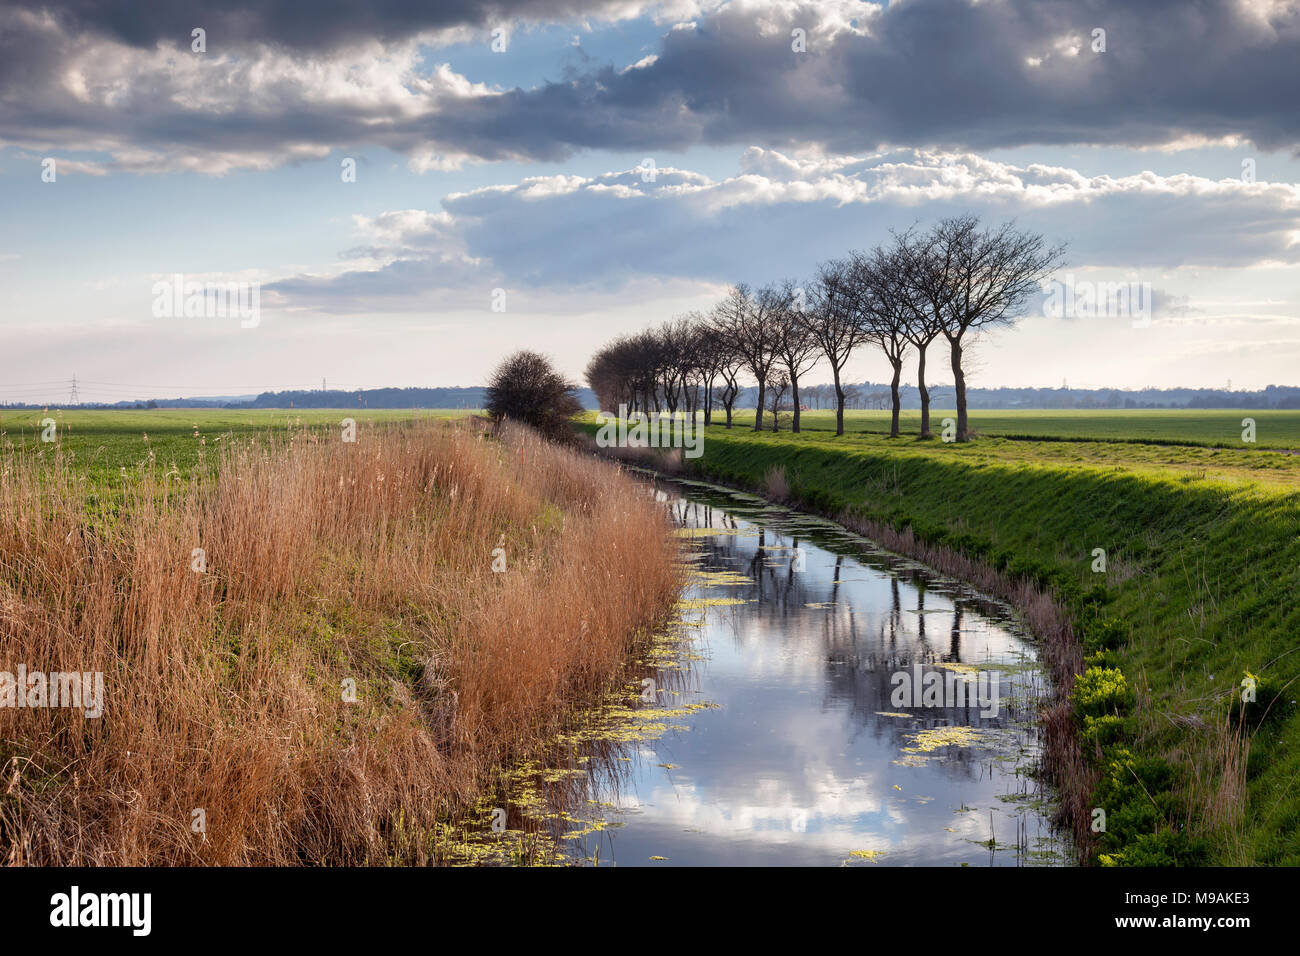 A canal on the Romney Marsh, Kent, UK with trees reflected in the water, abundant reeds and dramatic clouds above. Stock Photo